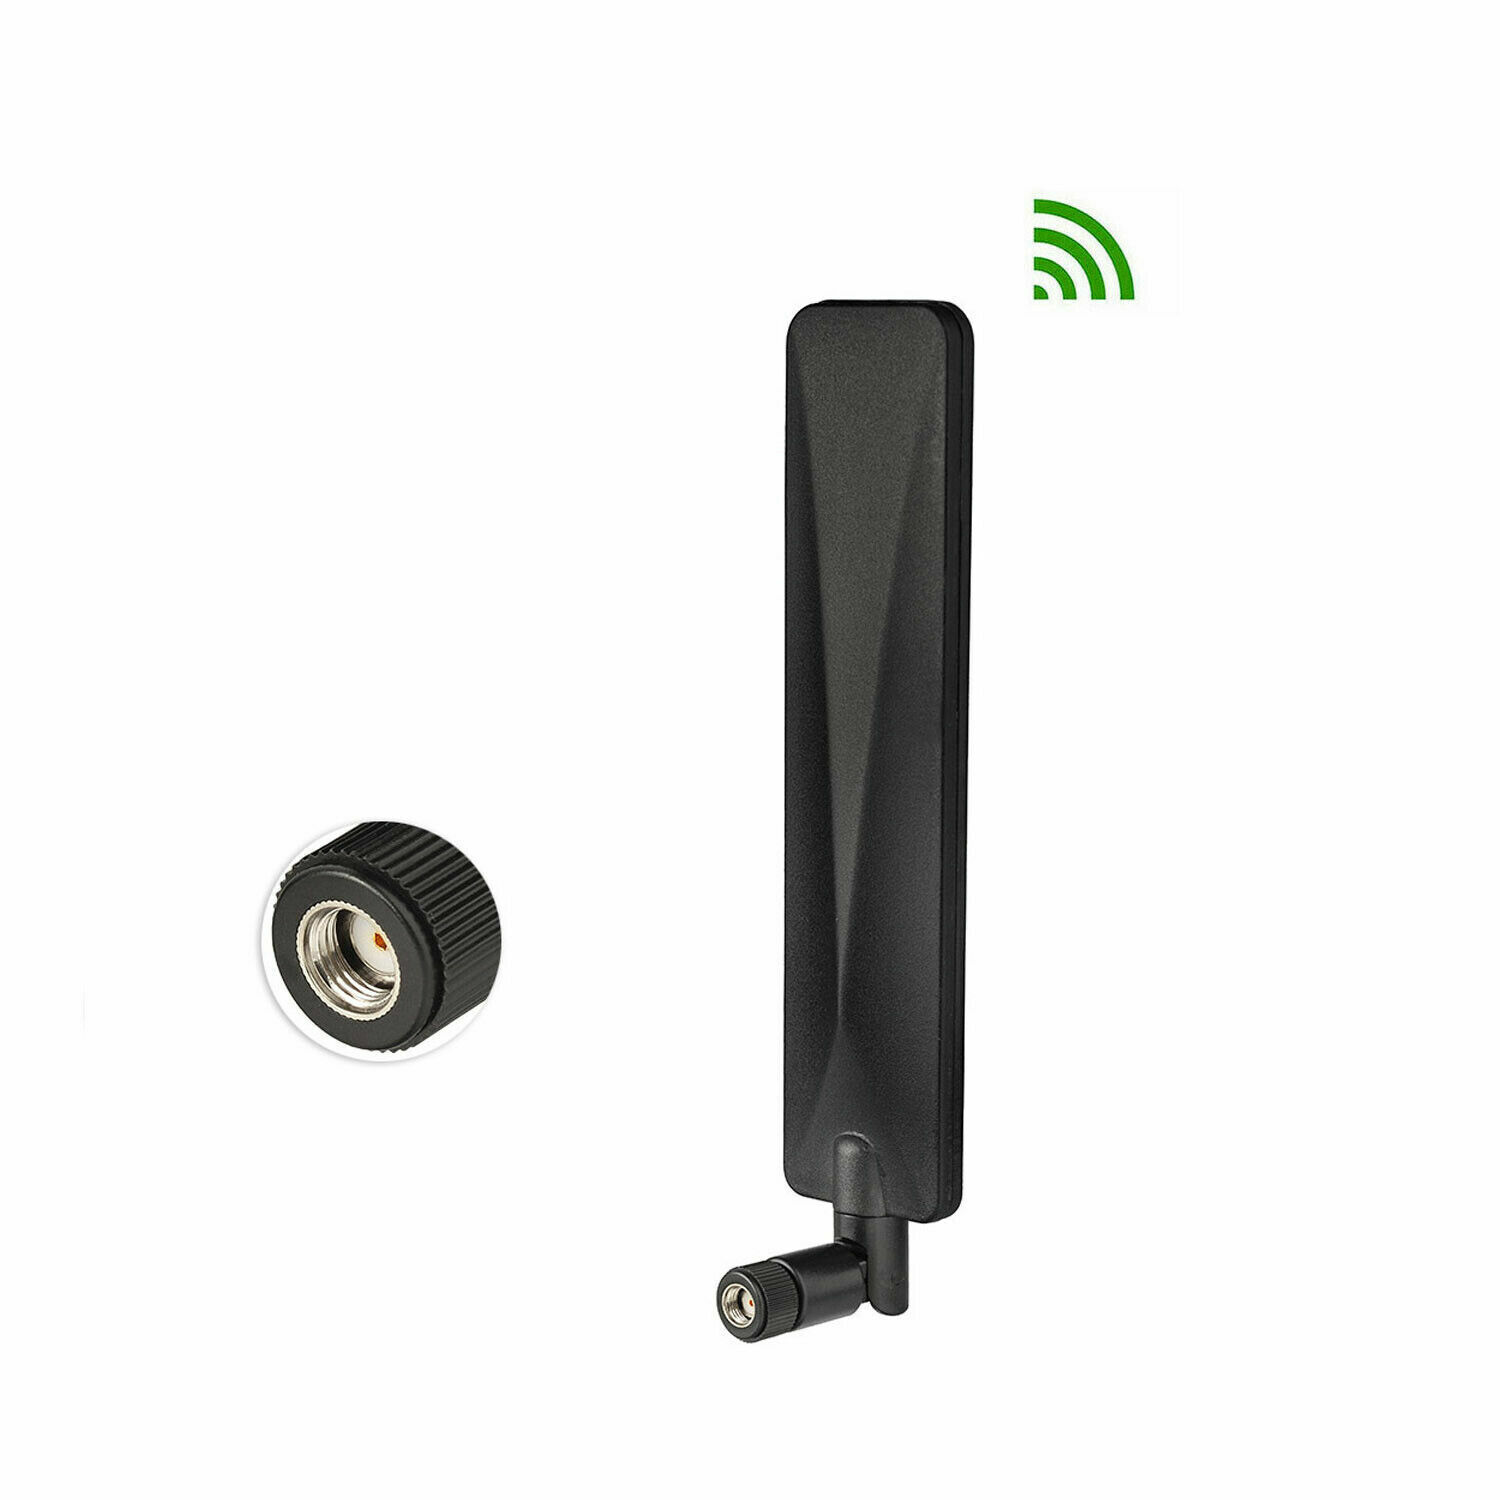 4G Antenna for Spypoint Link-Micro Verizon Cellular Trail Camera | LINK-MICRO-V